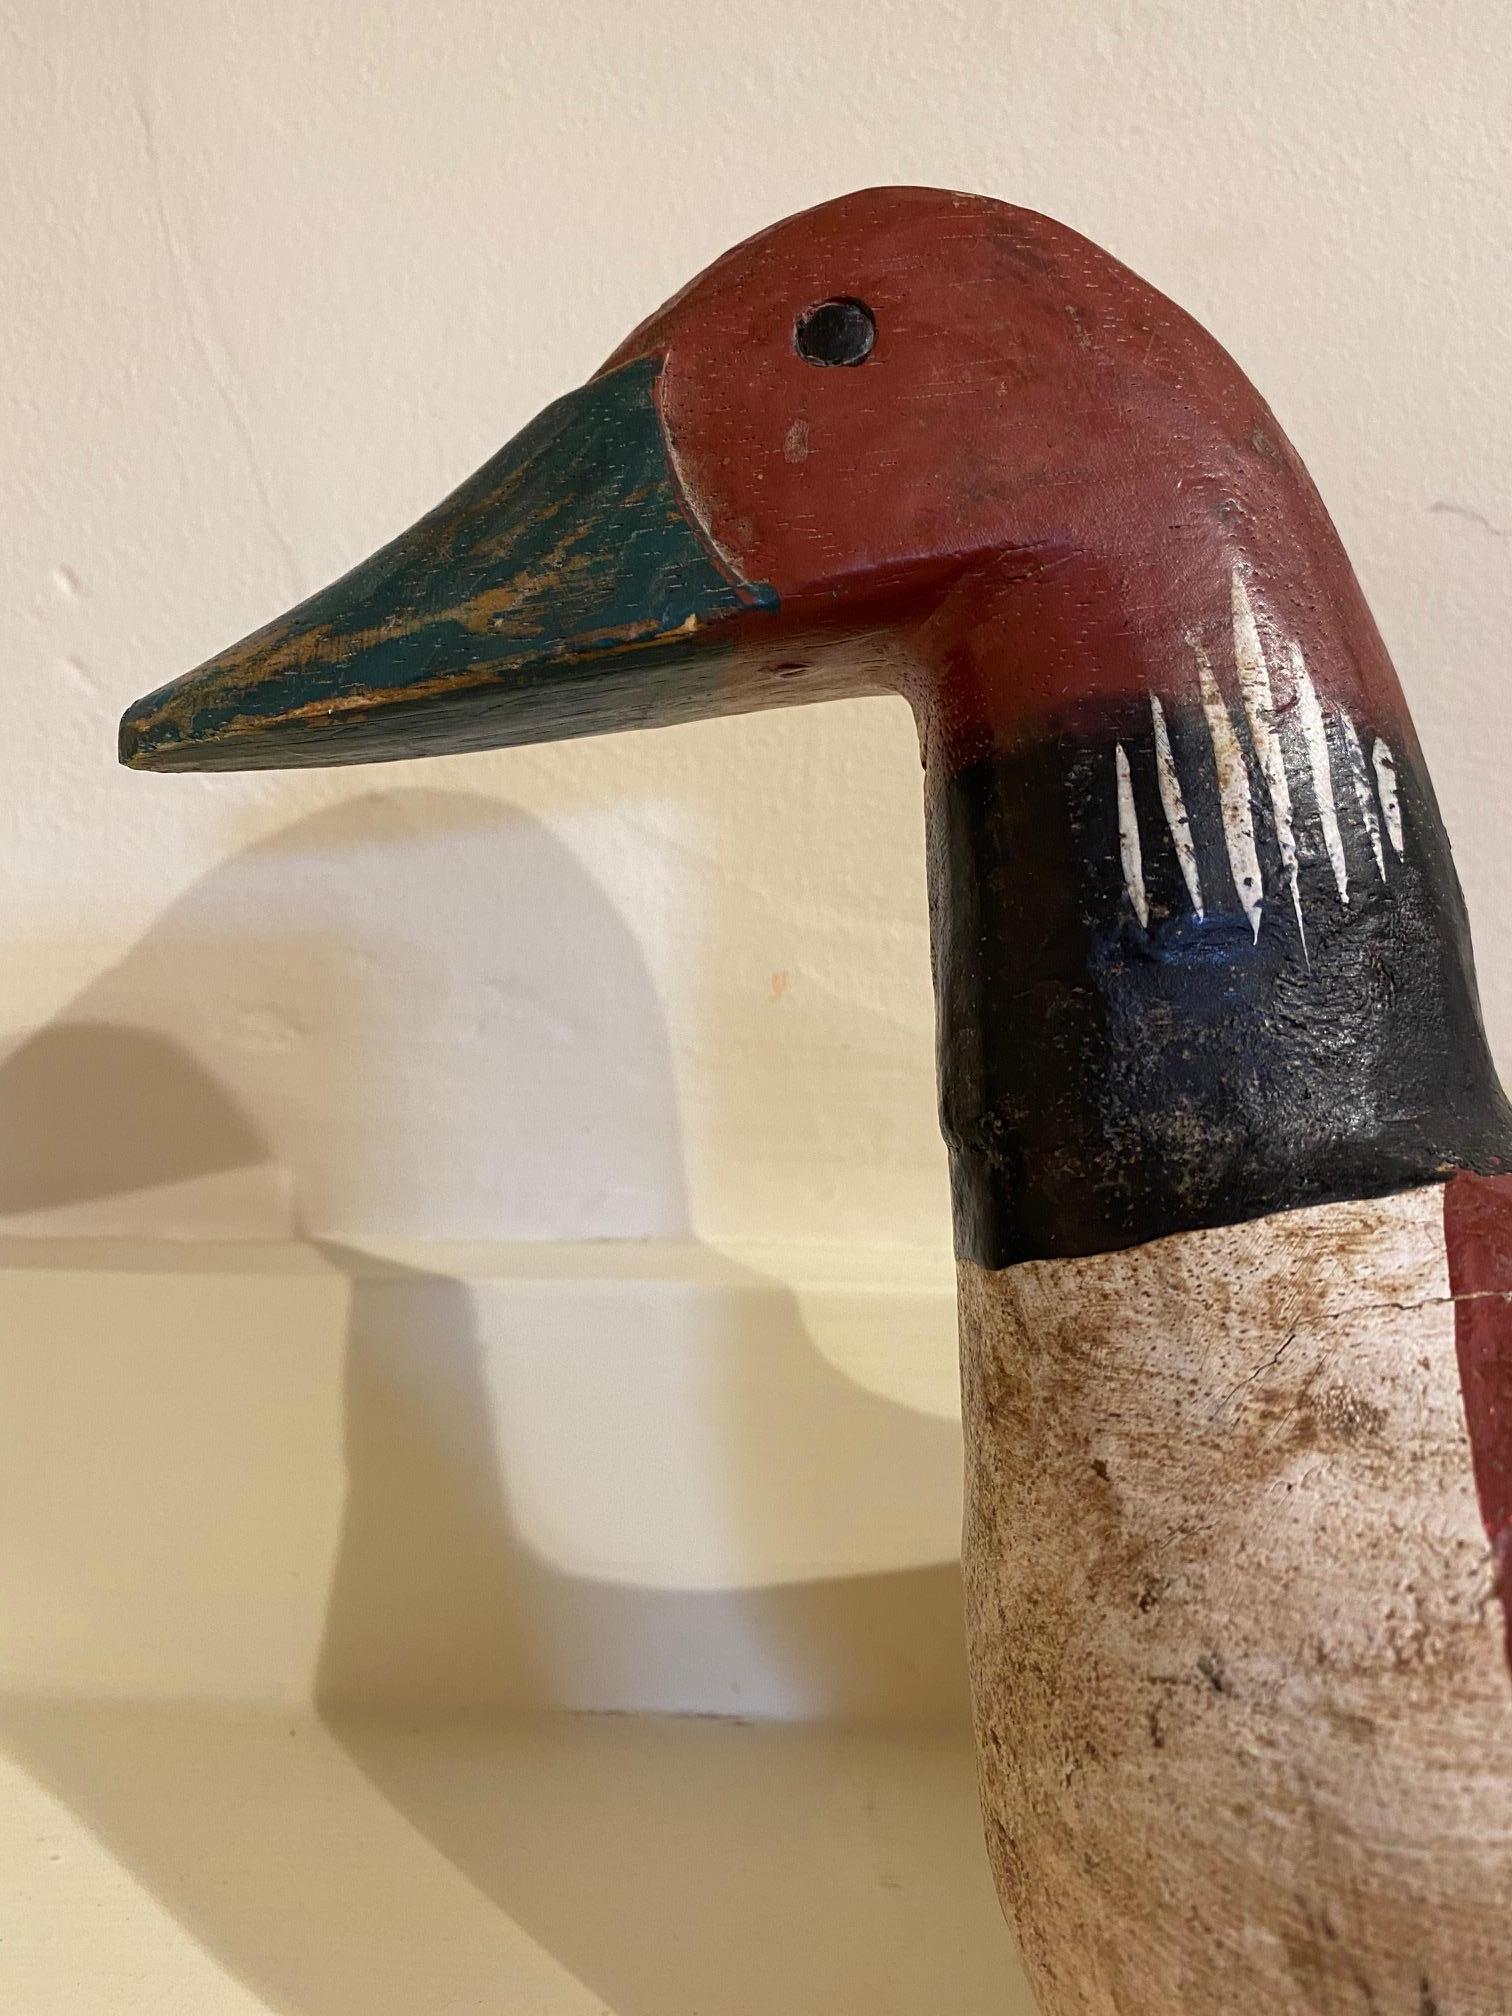 Vintage carved and decorated Native American Loon decoy, circa 1950. A hand carved pine decoy likely done with a hand ax (judging from the whittle marks), and painted in a bold pattern usually associated with Native American decoys. The red and